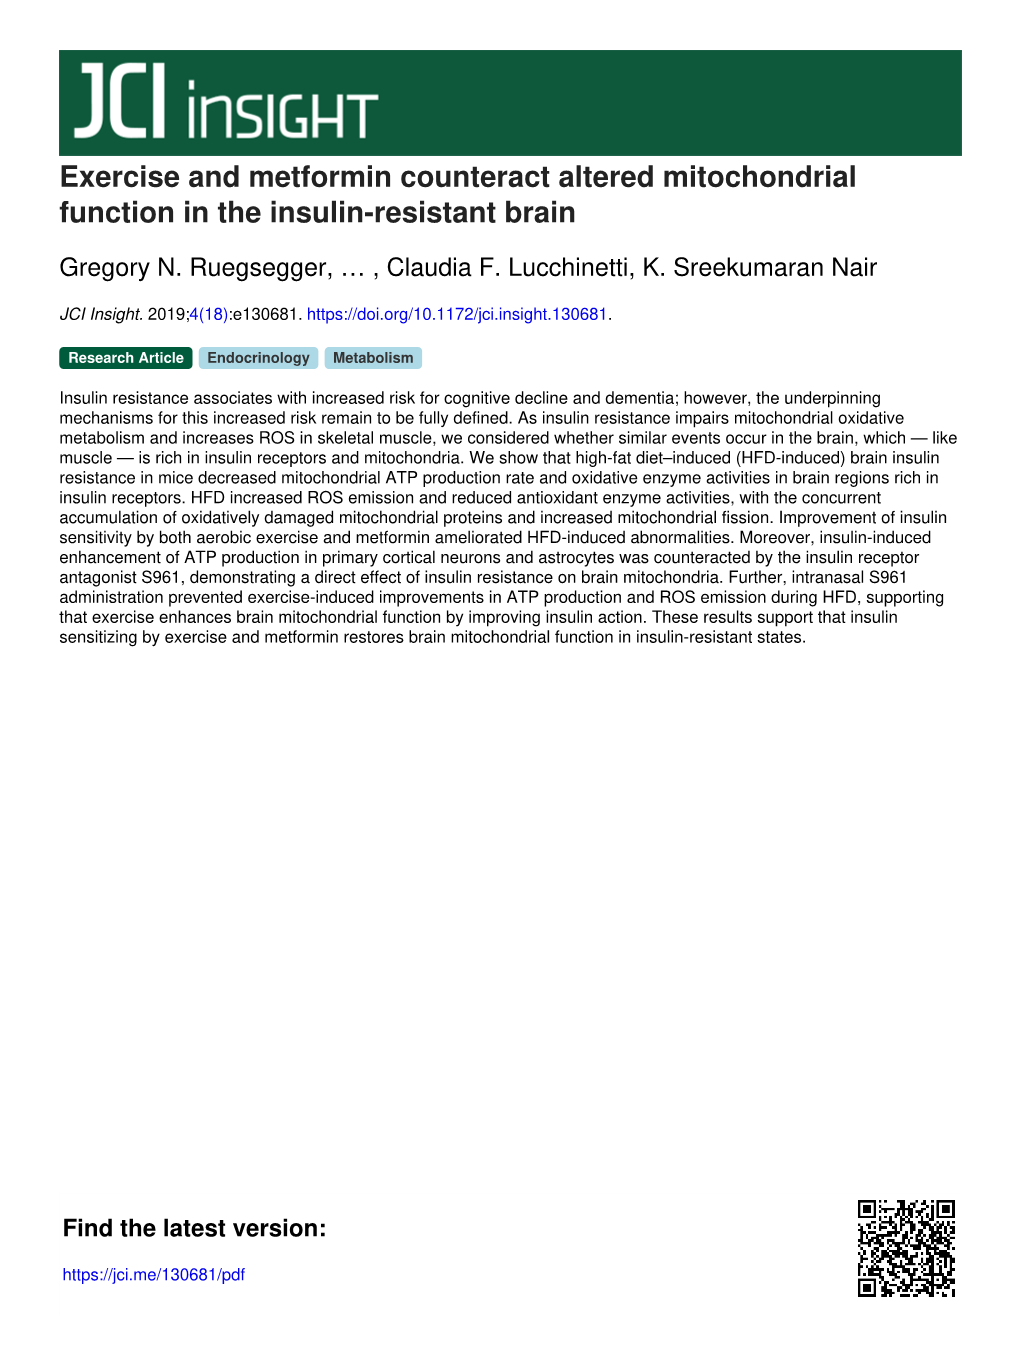 Exercise and Metformin Counteract Altered Mitochondrial Function in the Insulin-Resistant Brain